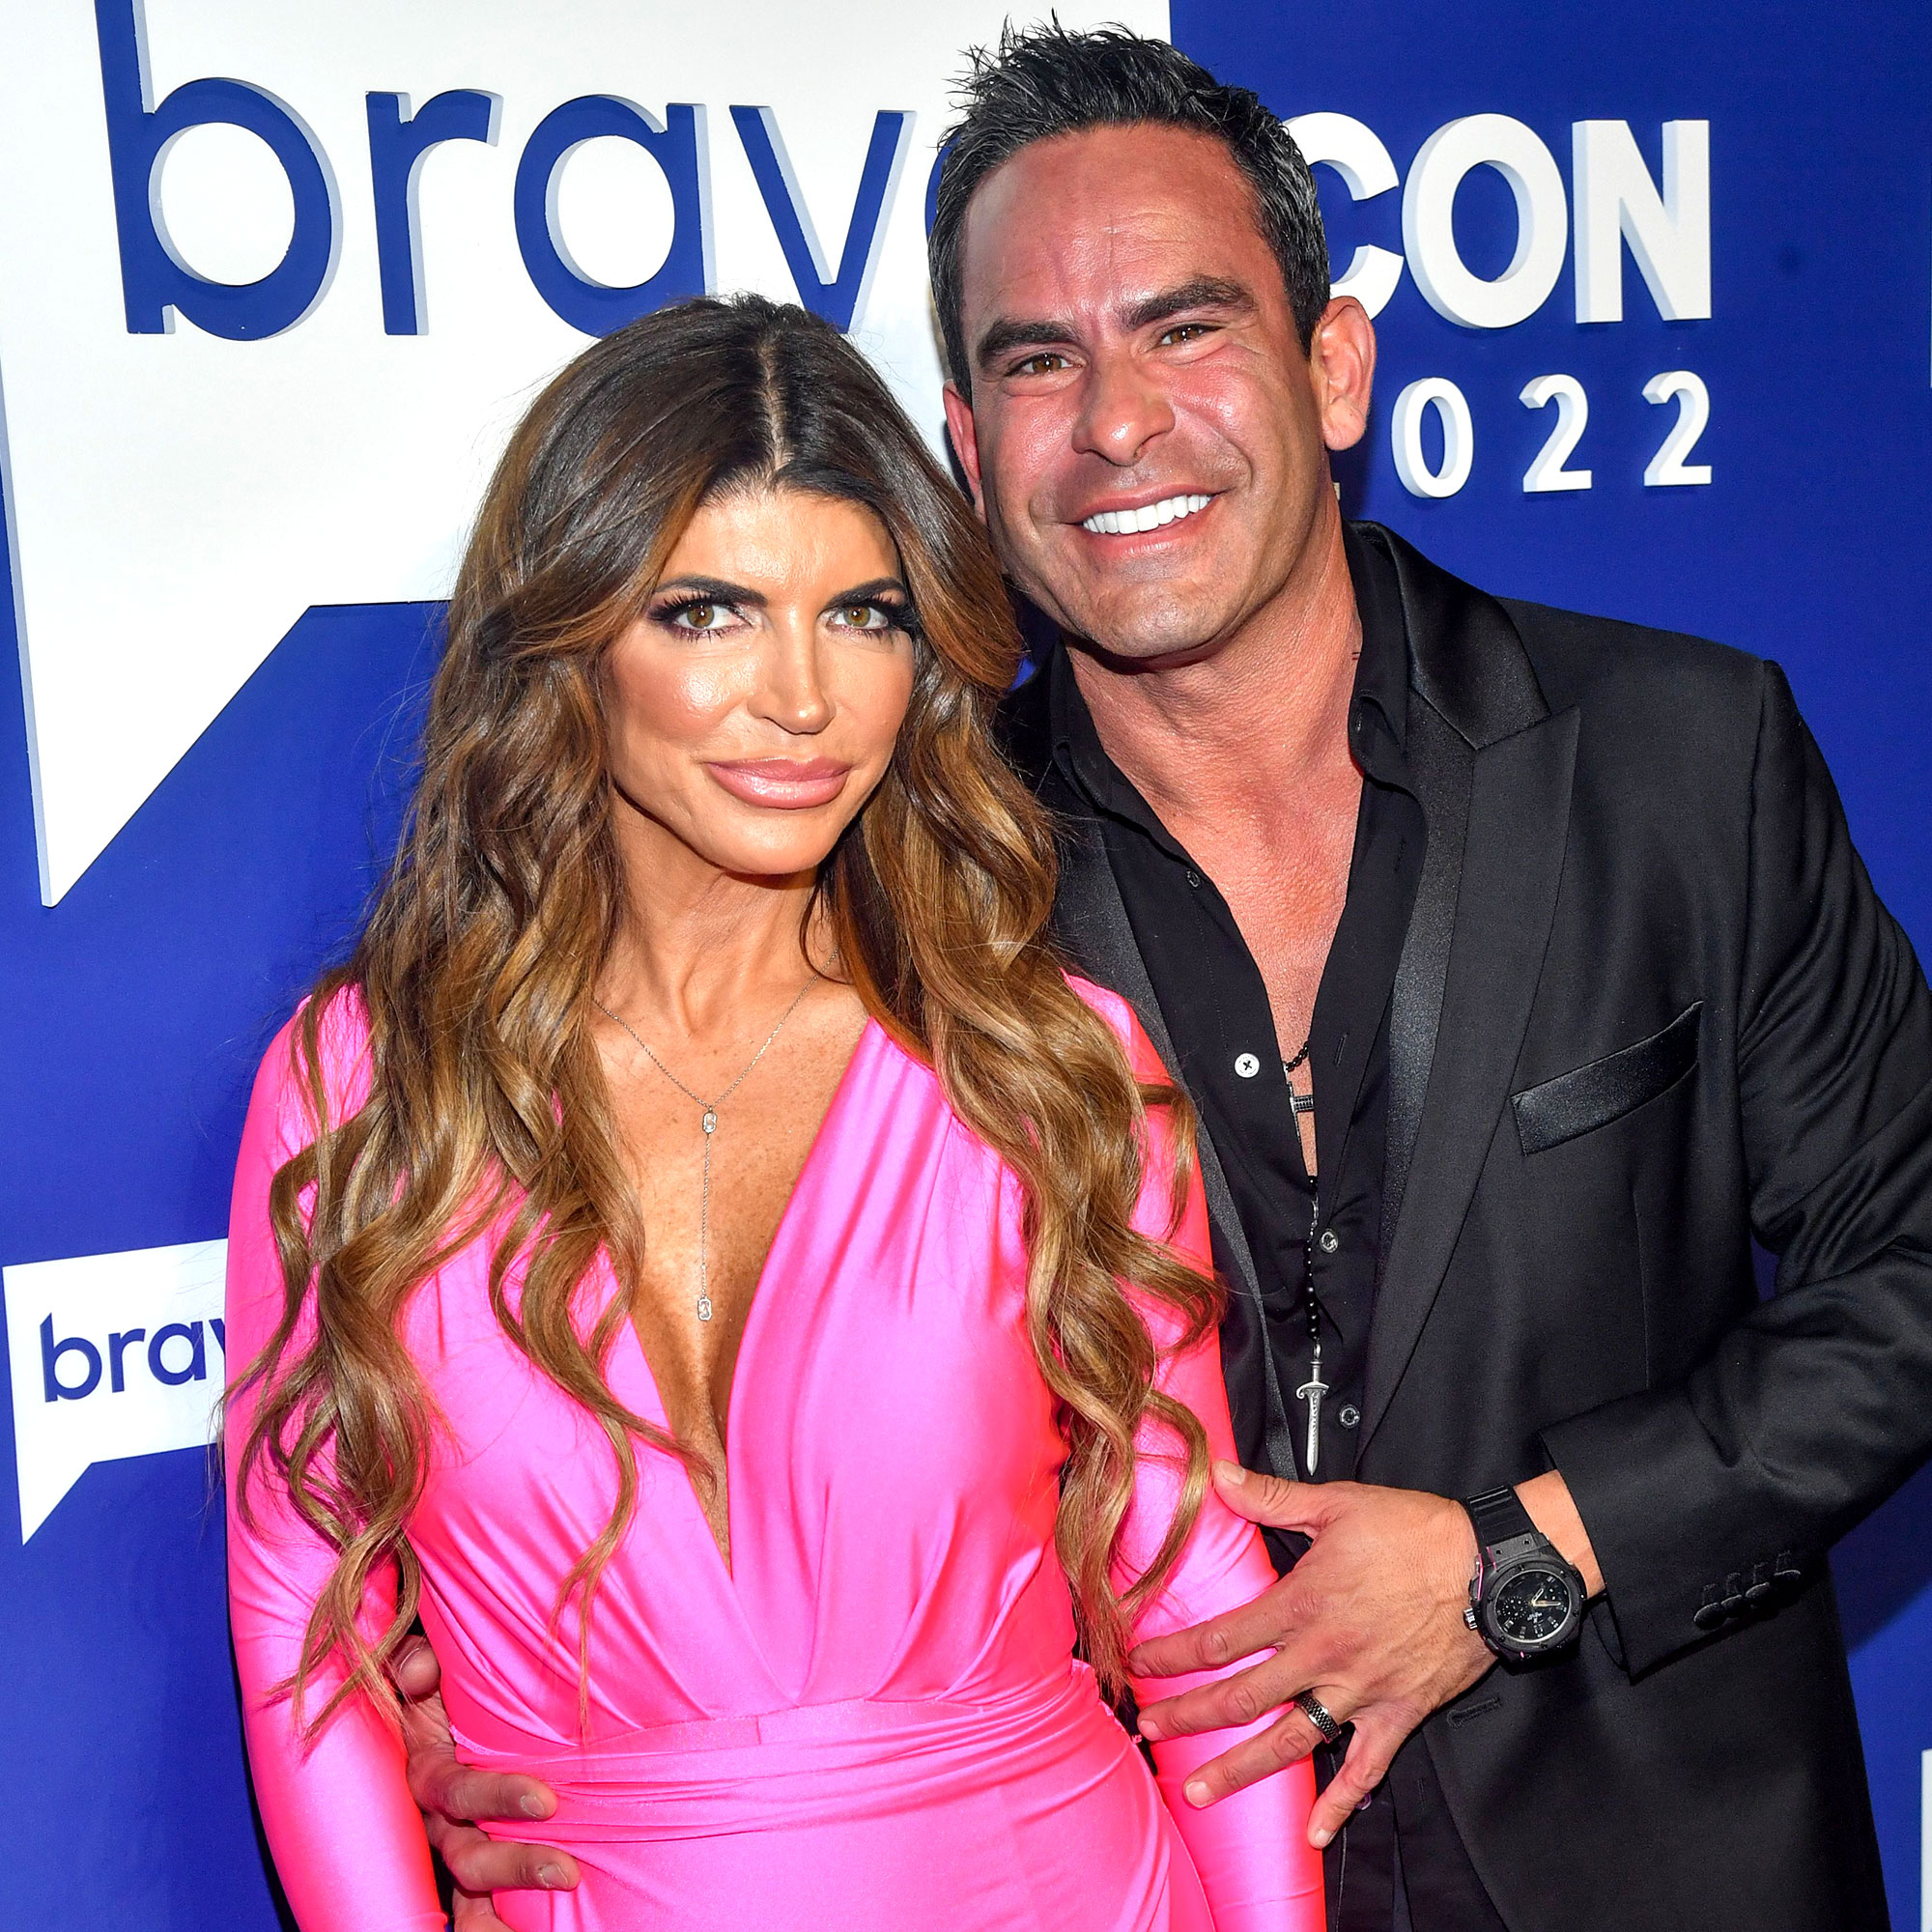 Teresa Giudice Gets Booed After Revealing She Didnt Sign a Prenup